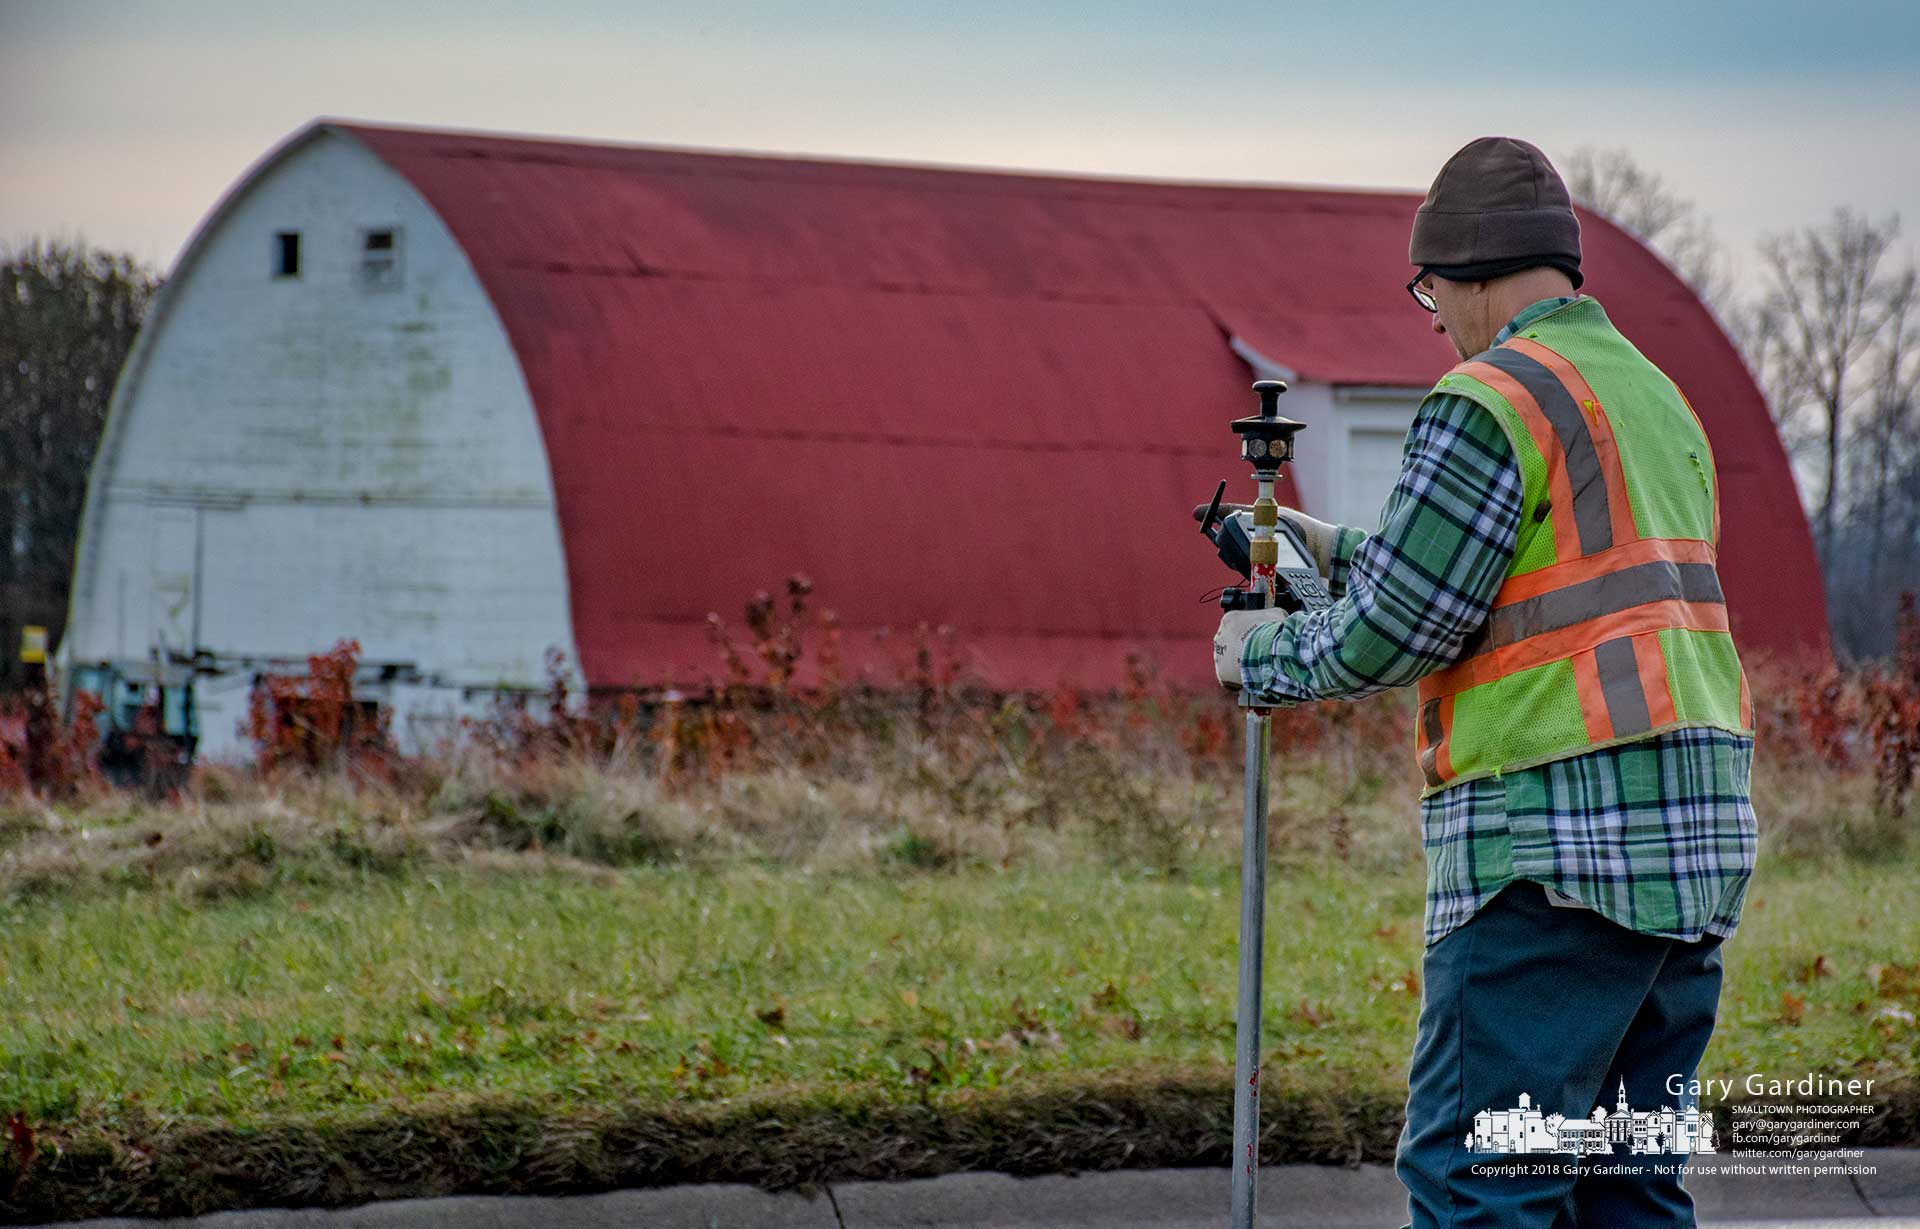 A surveyor measures elevations and locations along Cleveland Avenue near Cooper Road as part of a survey of land including Otterbein's hay fields and the Braun Farm. My Final Photo for Dec. 6, 2018.